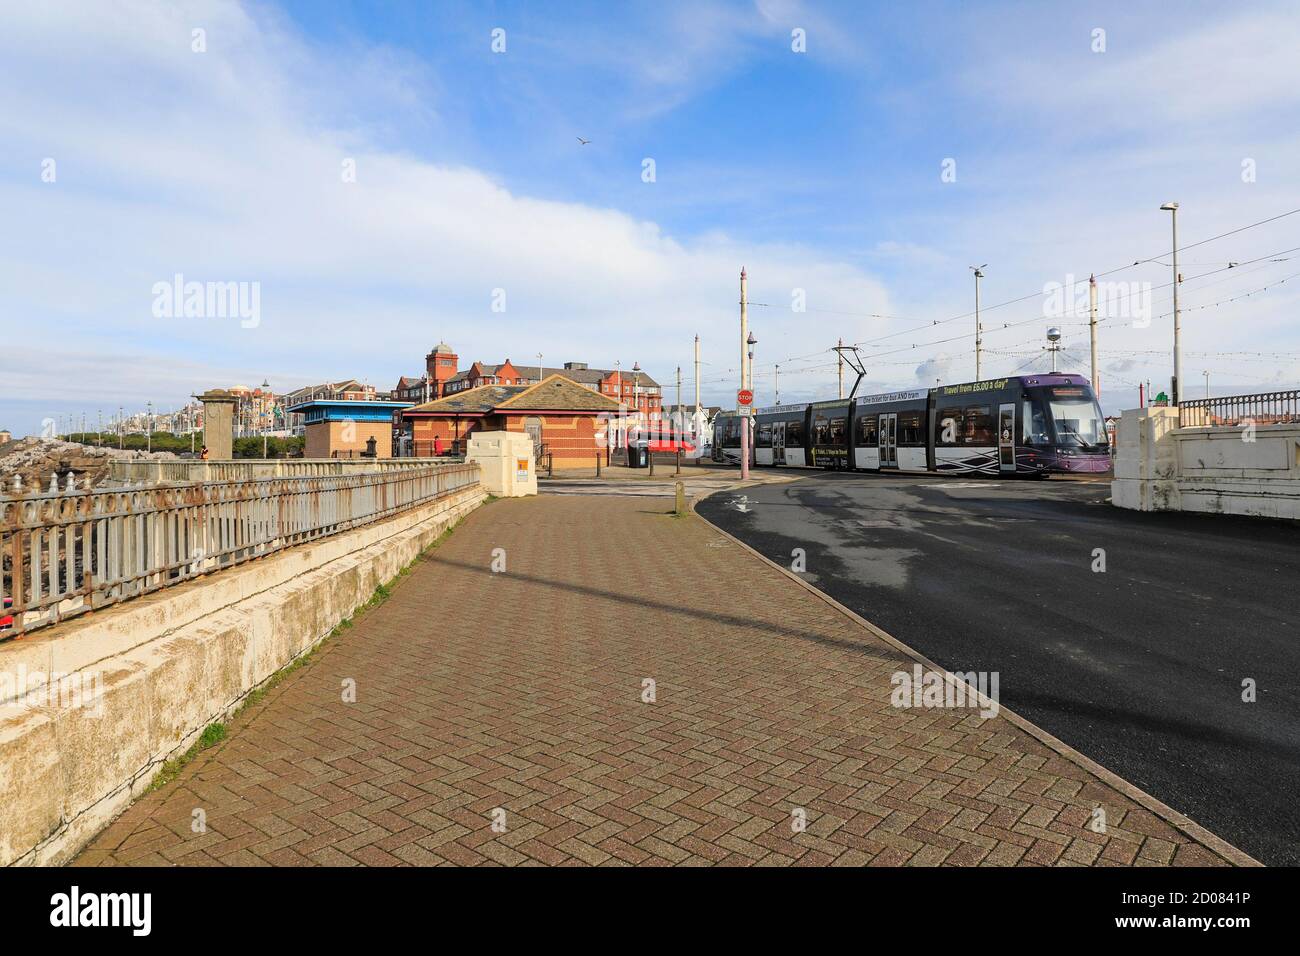 Promenade and tram on the seafront at Blackpool, Lancashire, England, UK Stock Photo